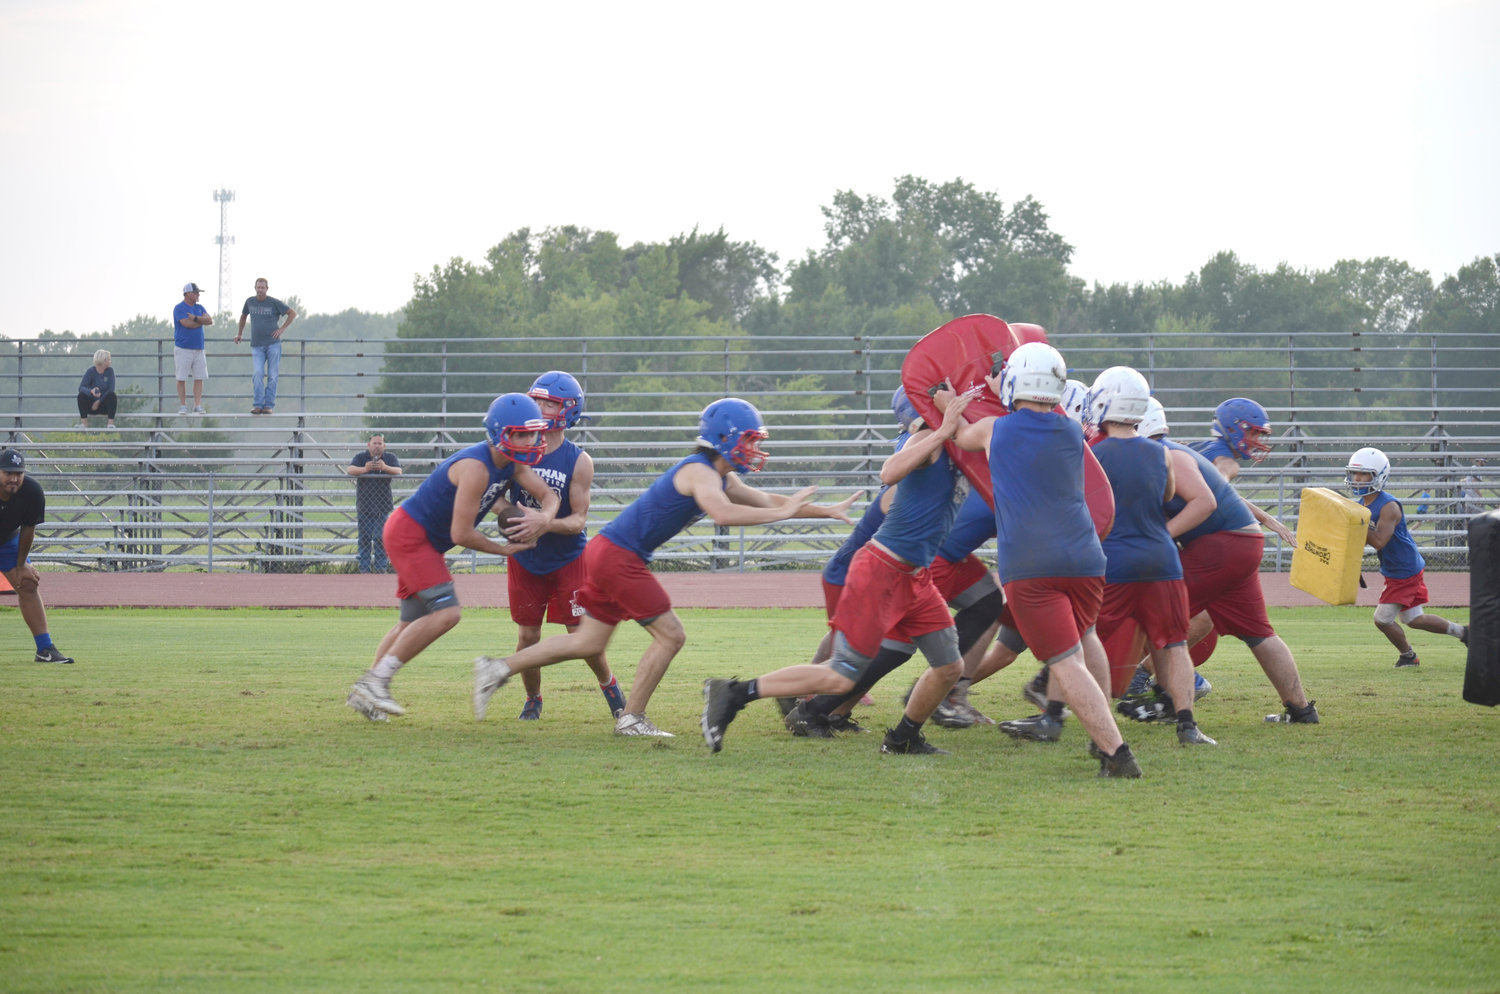 The Quitman Bulldogs started summer drills under new head coach Shane Webber Monday evening at the high school practice field. Volleyball, band, cheerleaders and cross country have also begun preparations for the fall season. The first football game is Aug. 27 at Cumby while the volleyball team hosts Cumby Aug. 10 to open the season.